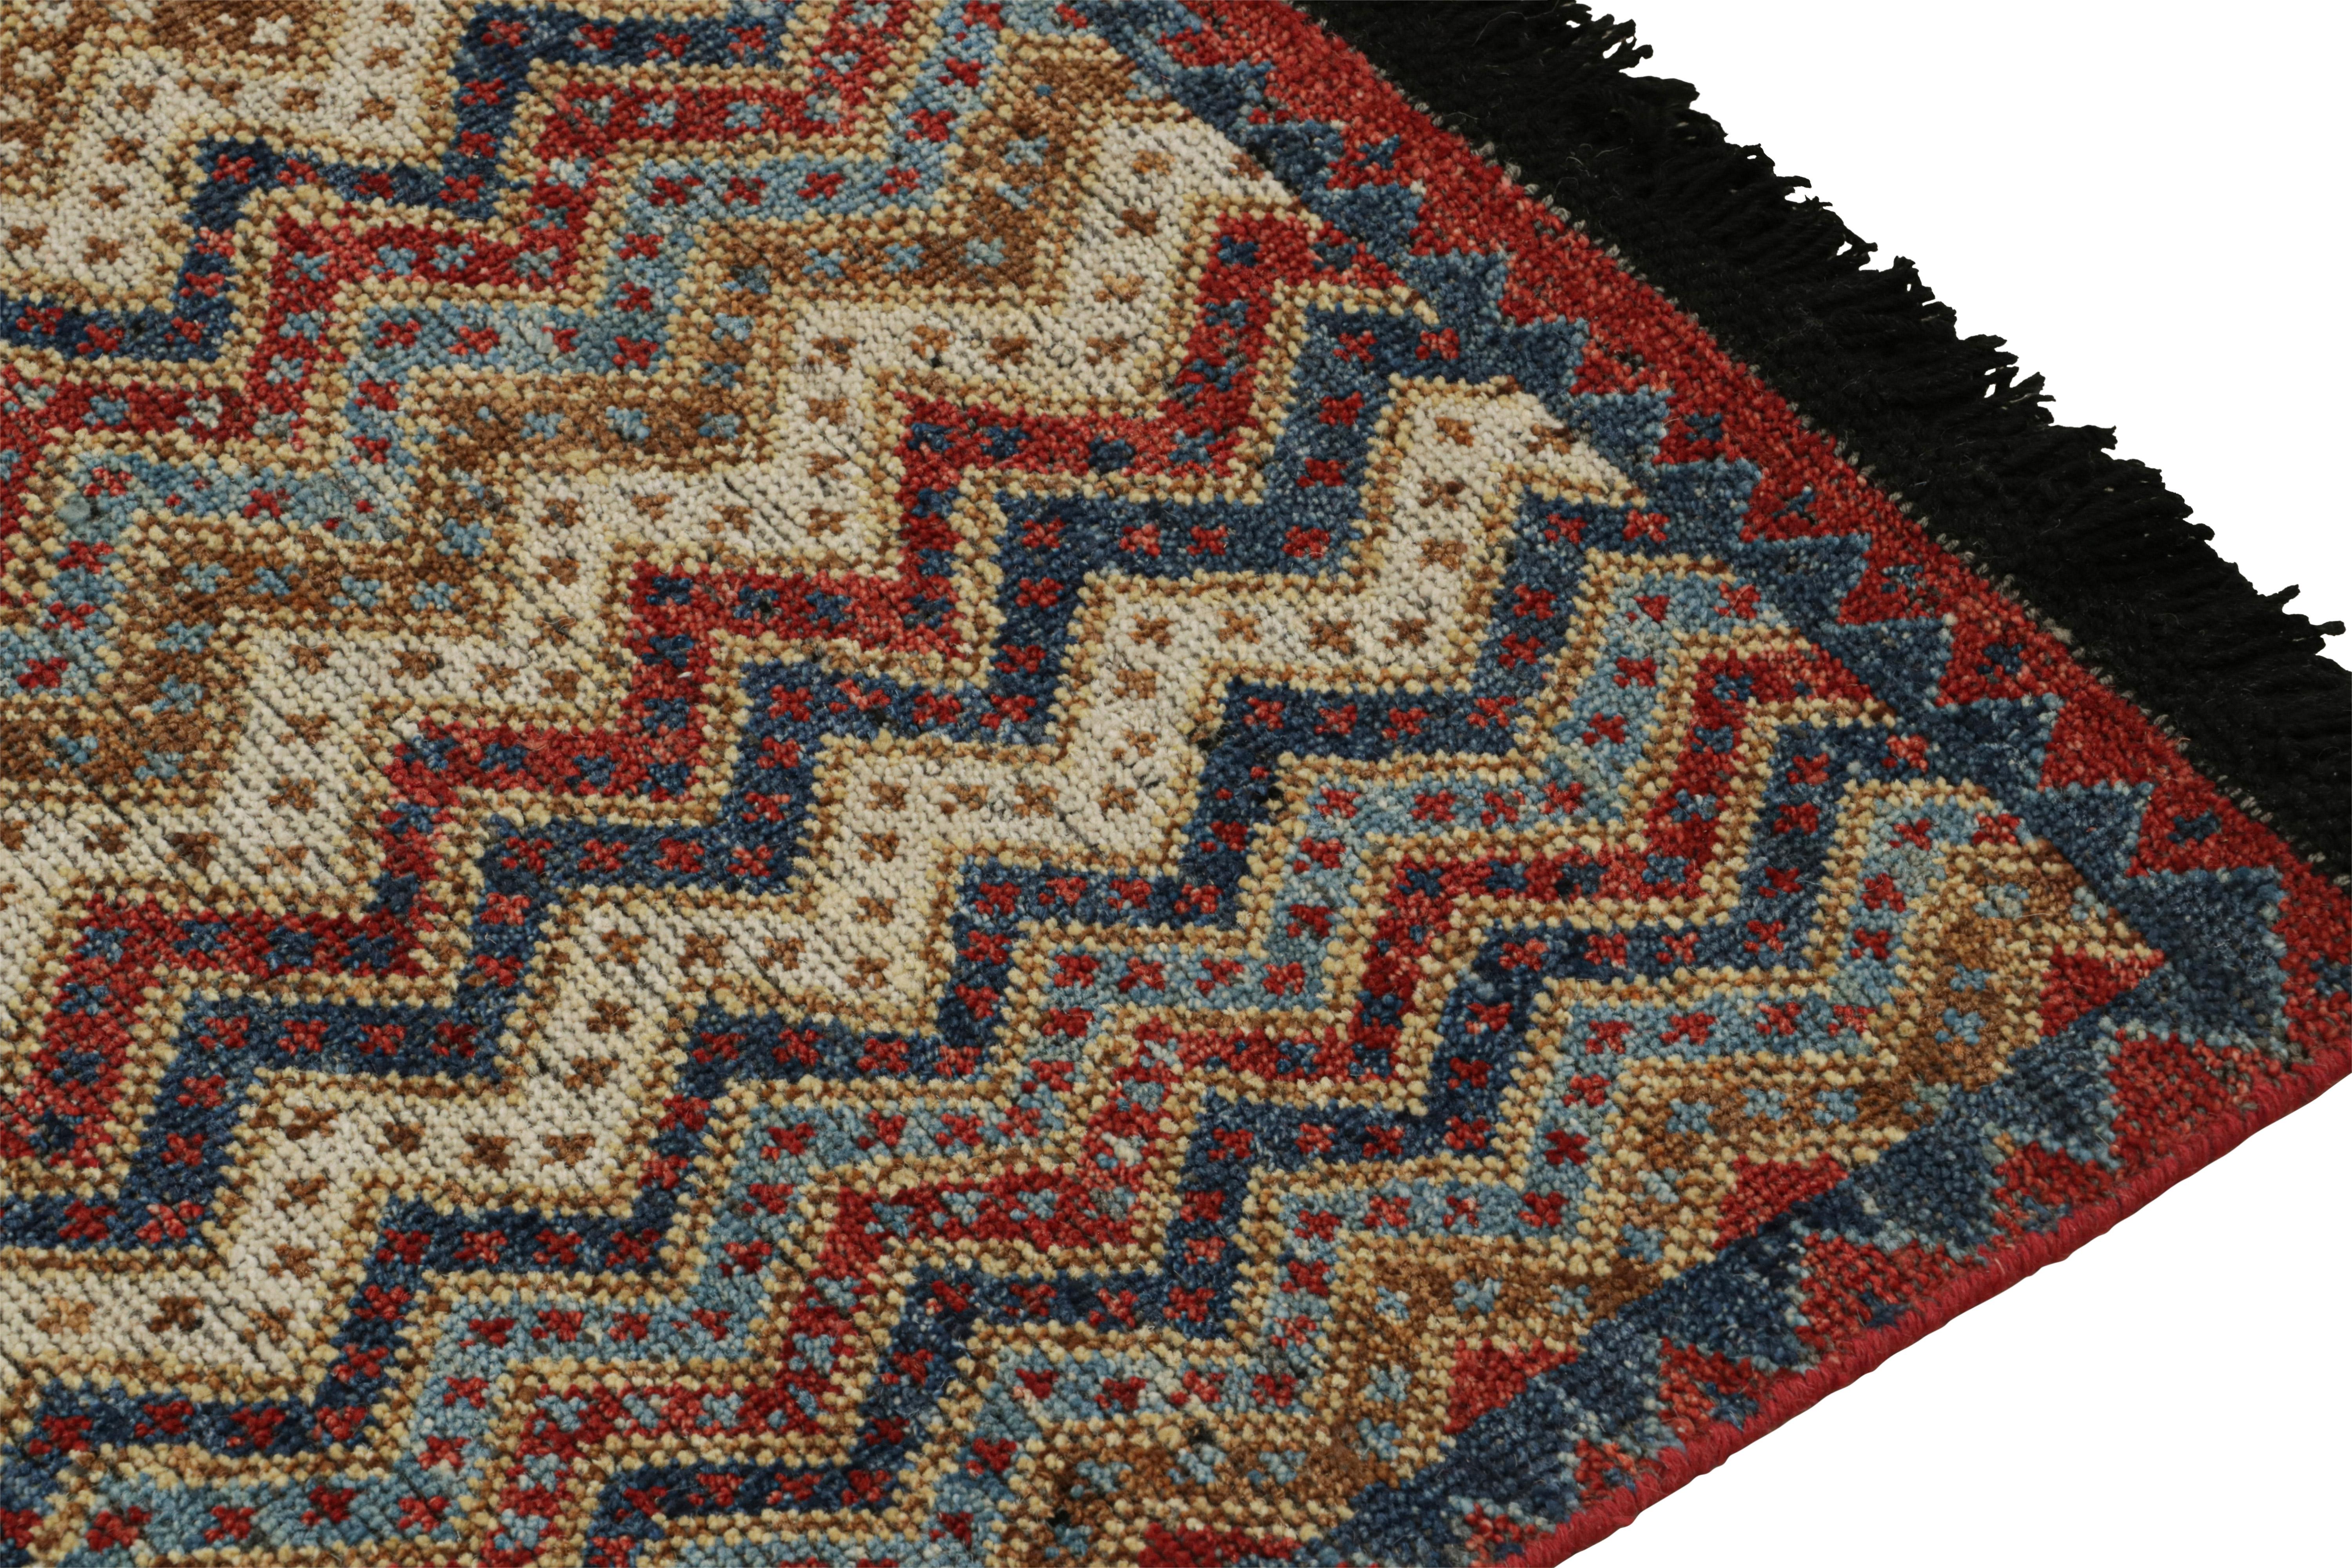 Rug & Kilim’s Antique Tribal Style rug in Red, Blue, Brown & White Patterns In New Condition For Sale In Long Island City, NY